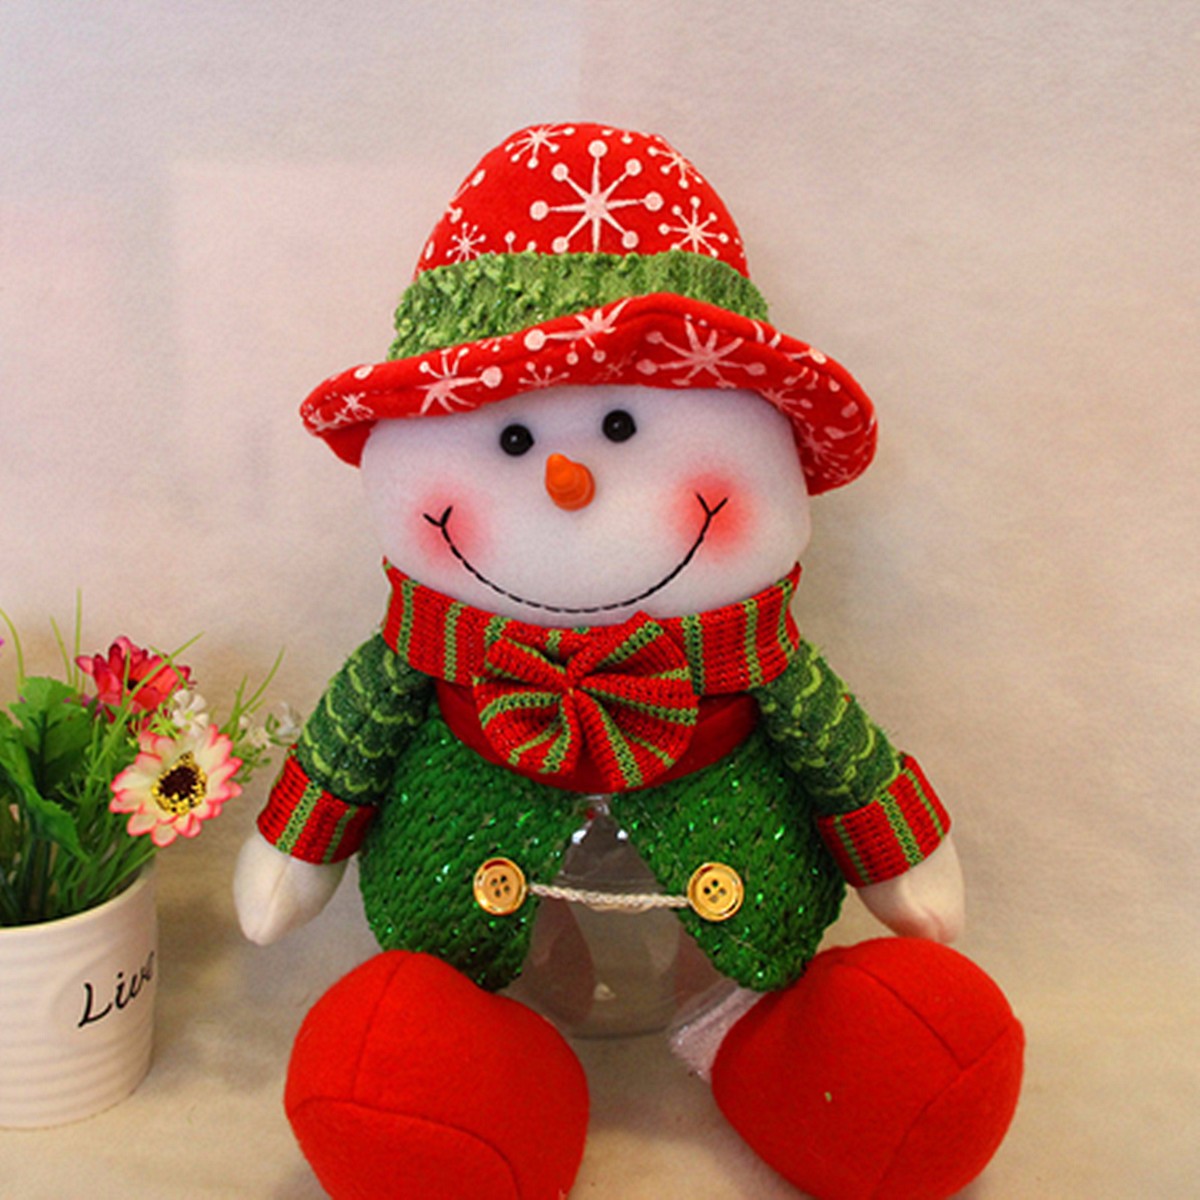 Lovely Snowman Santa Claus Candy Round Jar Bottle Christmas Kid Toy Doll Gift Decor - Photo: 5